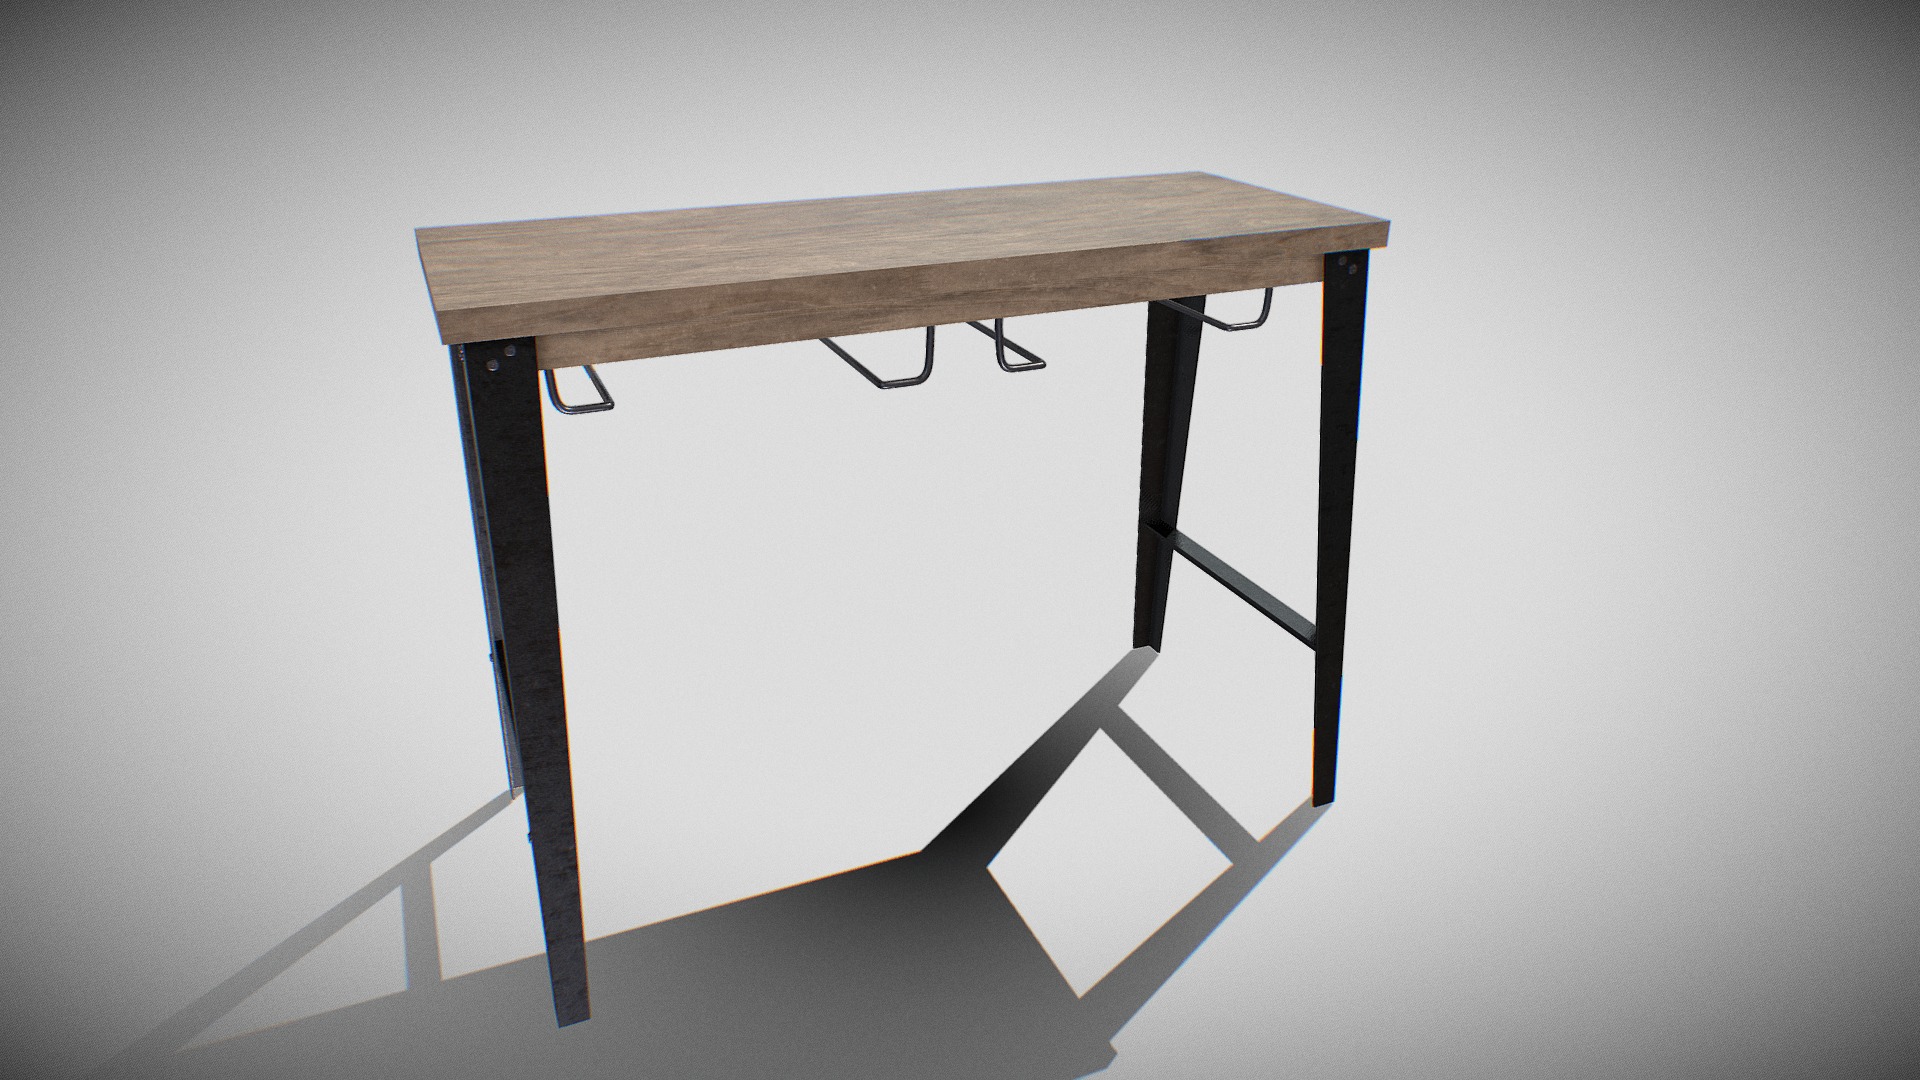 3D model Table wooden 10 - This is a 3D model of the Table wooden 10. The 3D model is about a wooden table with legs.